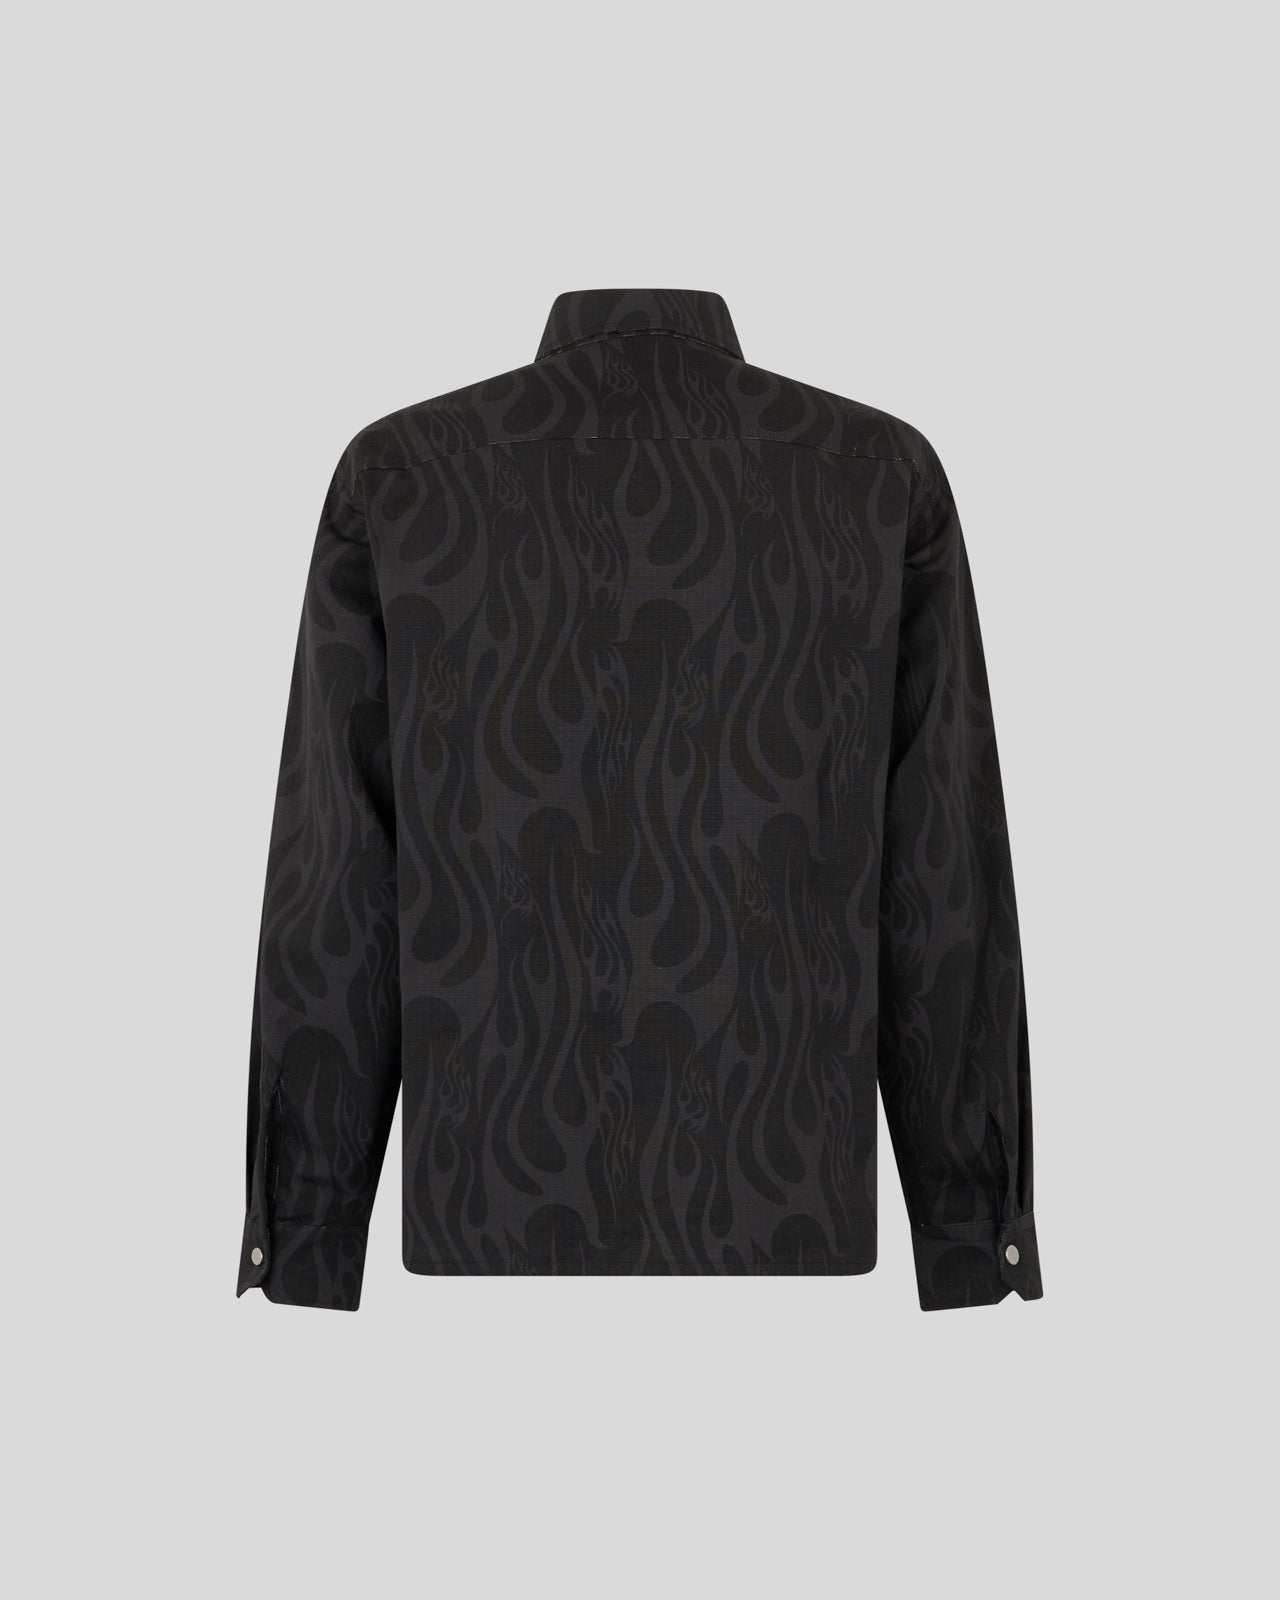 BLACK CARGO JACKET WITH ALL OVER FLAMES PRINT AND GOTIC LOGO